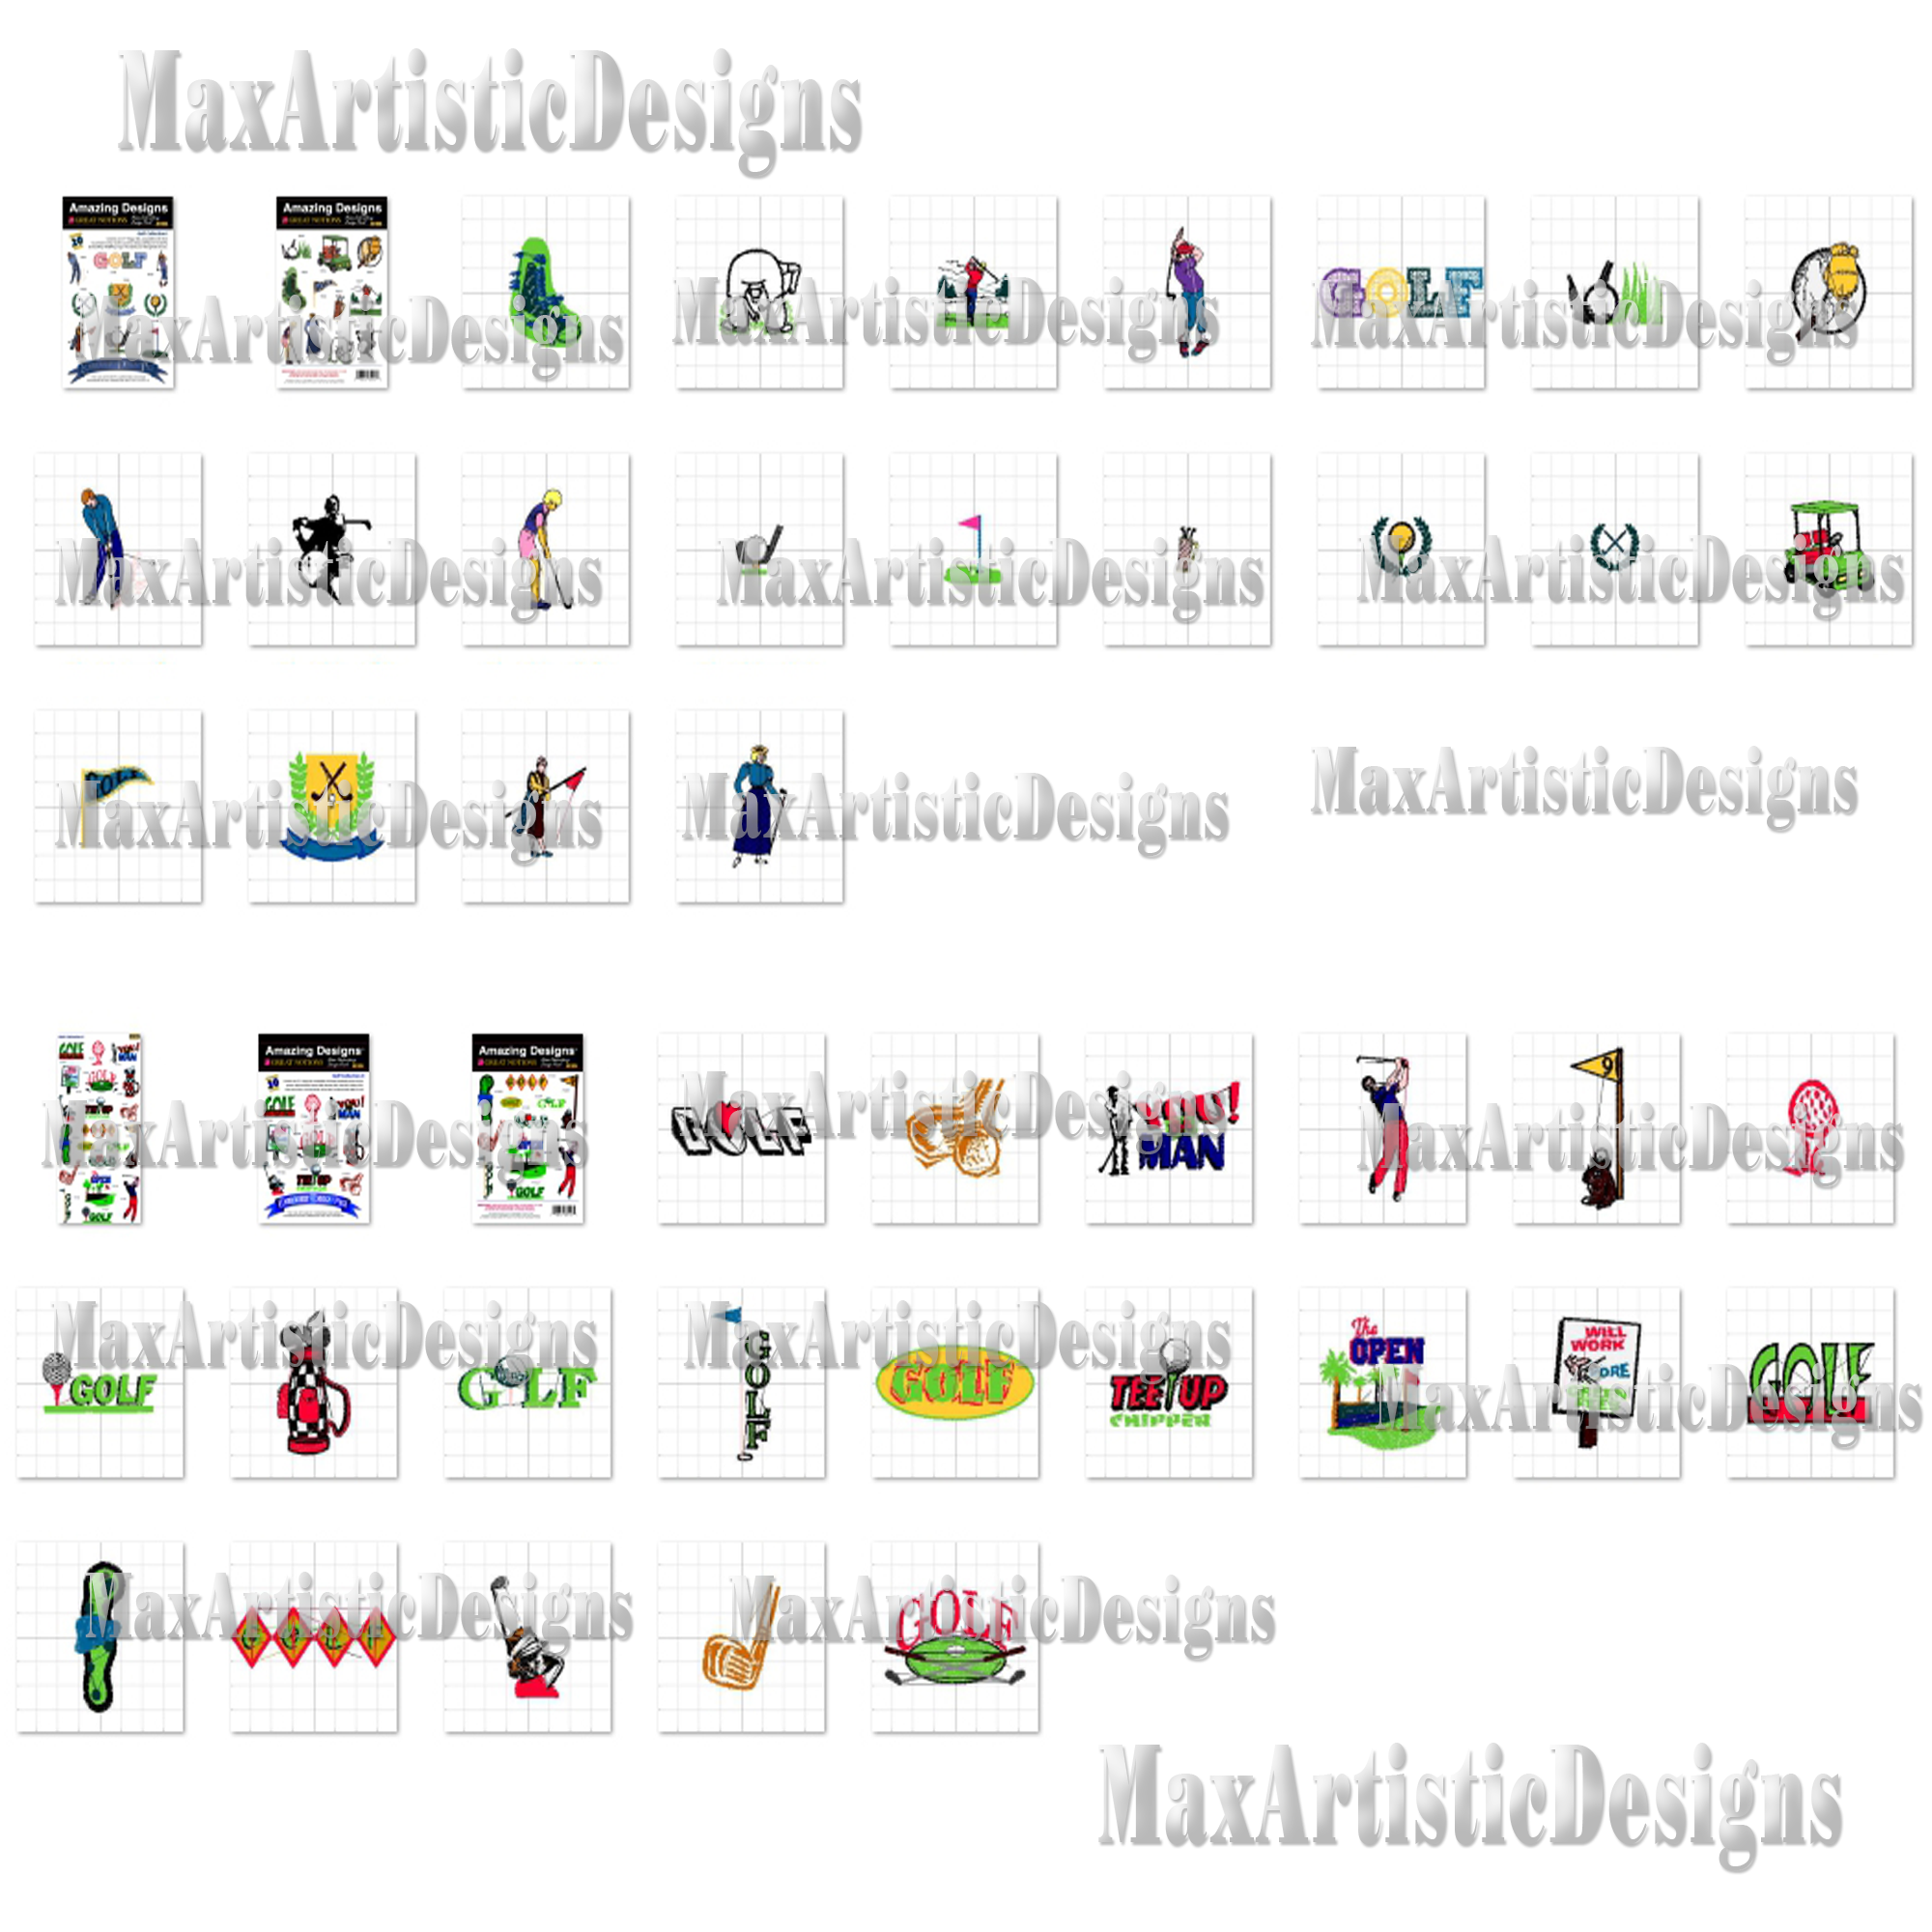 190+ Golf embroidery patterns Machine embroidery designs